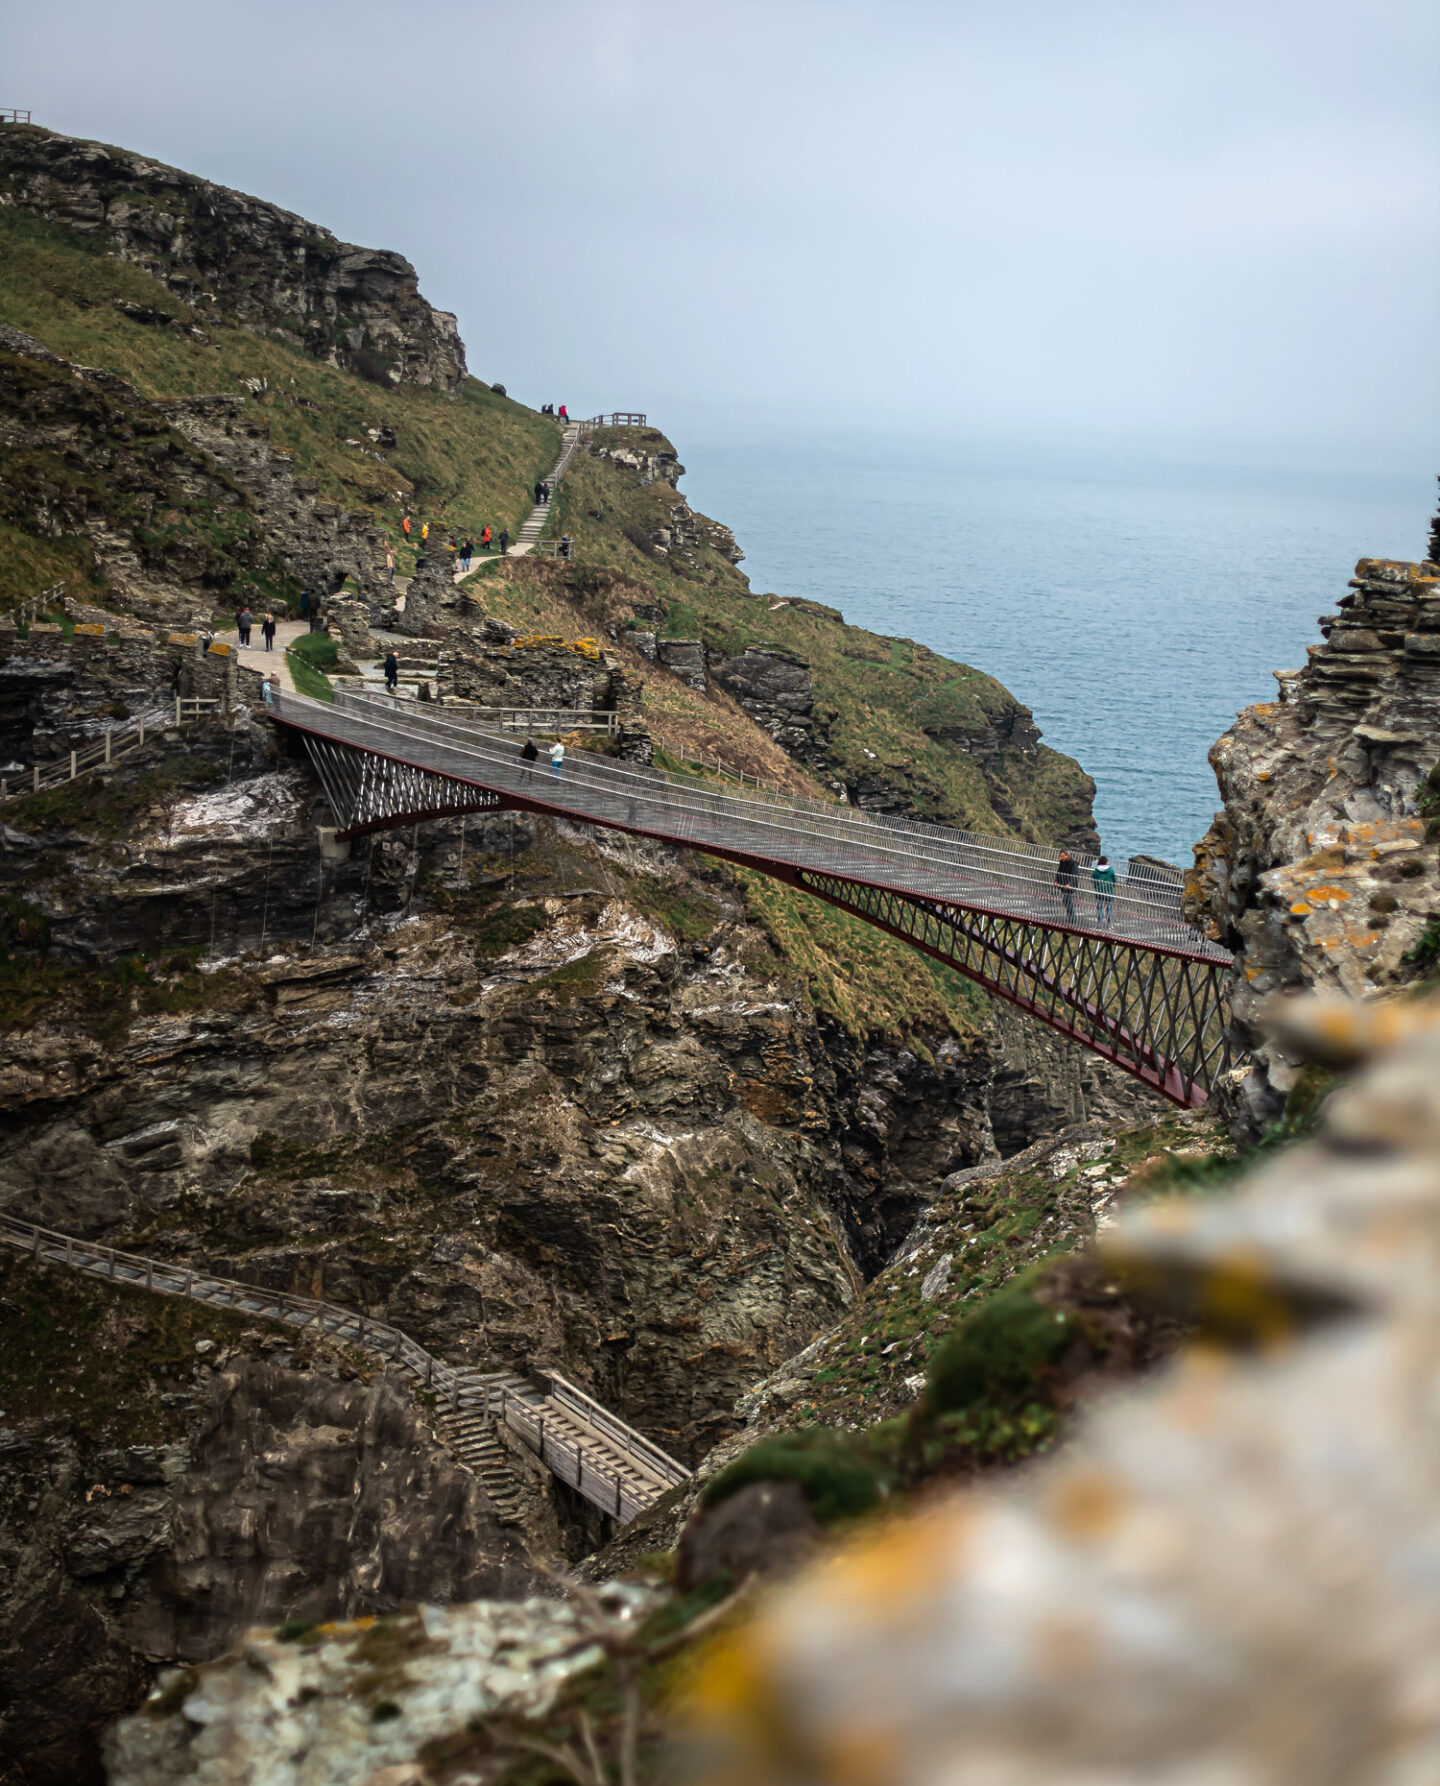 A scenic view of the Tintagel Bridge in Cornwall, stretching across a deep rocky chasm with the sea visible in the background. The modern footbridge, made of metal and wood, connects two cliff tops, allowing visitors to walk between them. People are seen walking along the bridge and the surrounding pathways, highlighting the dramatic and breathtaking landscape of the Cornish coastline.